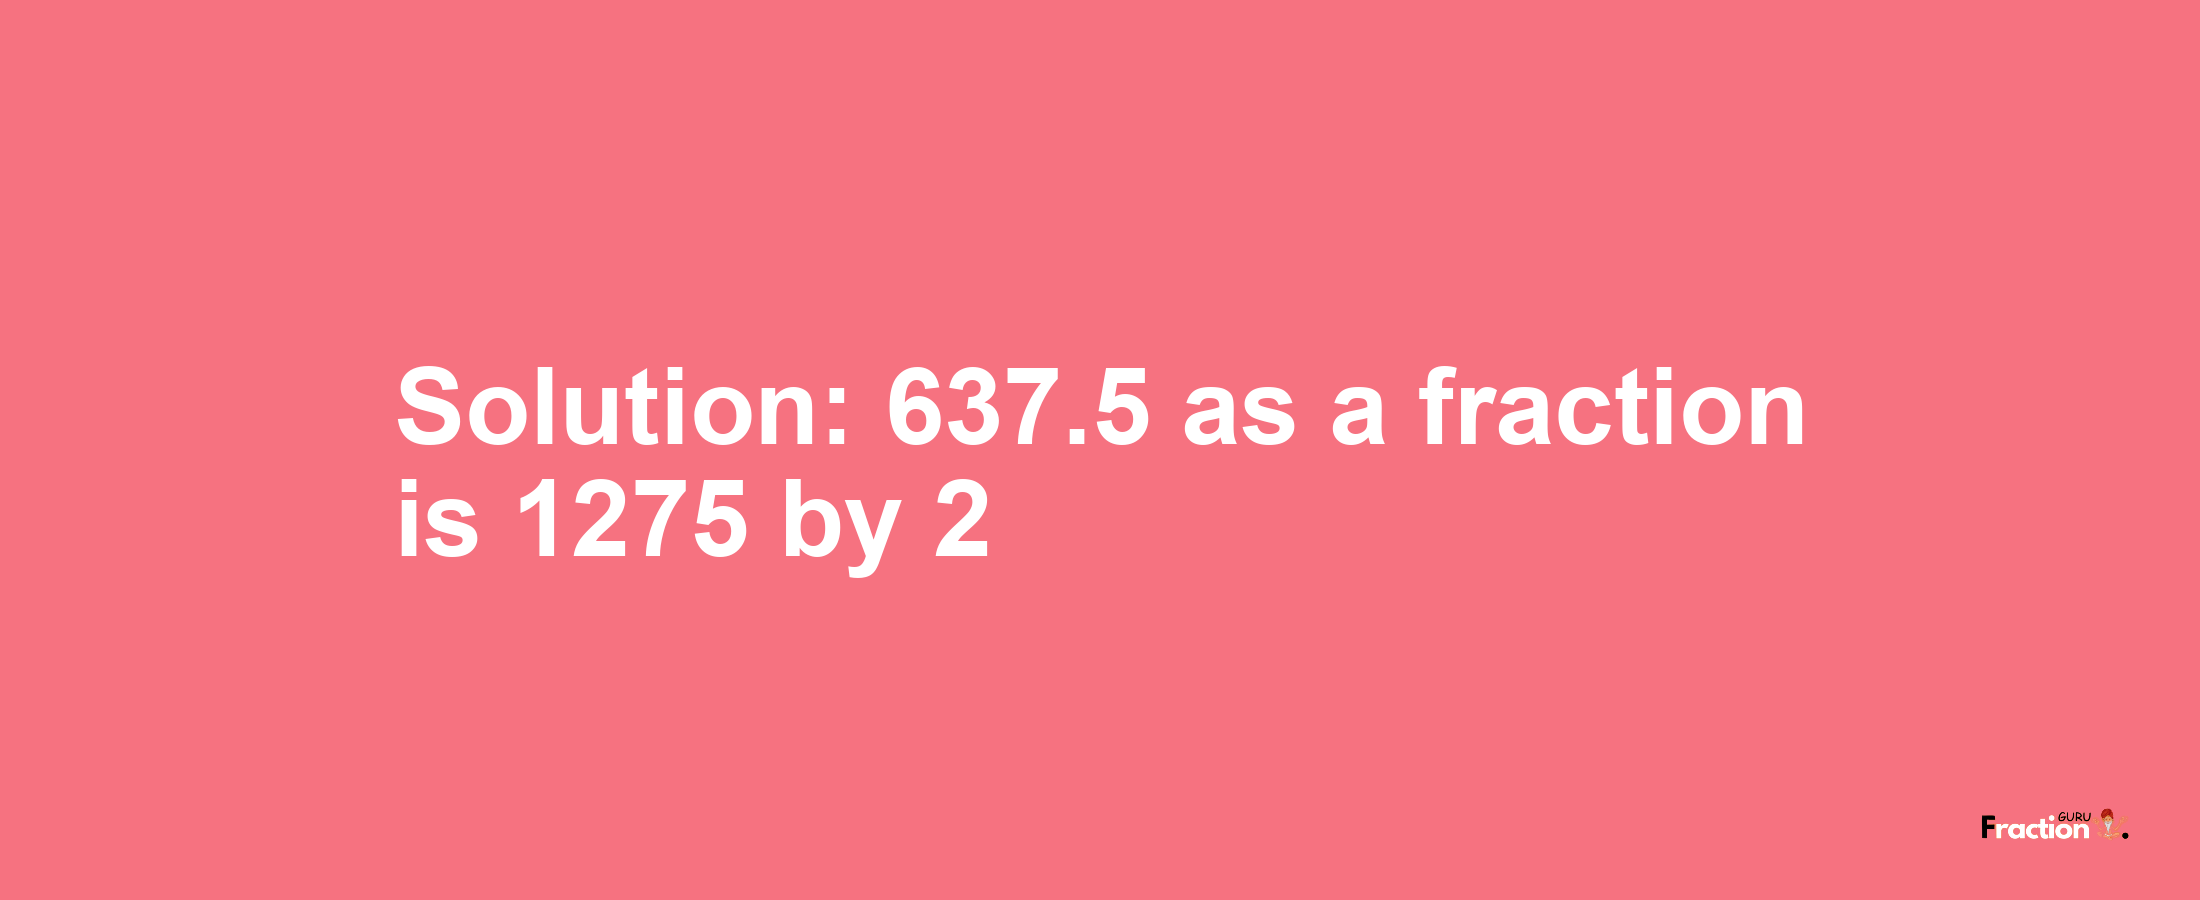 Solution:637.5 as a fraction is 1275/2